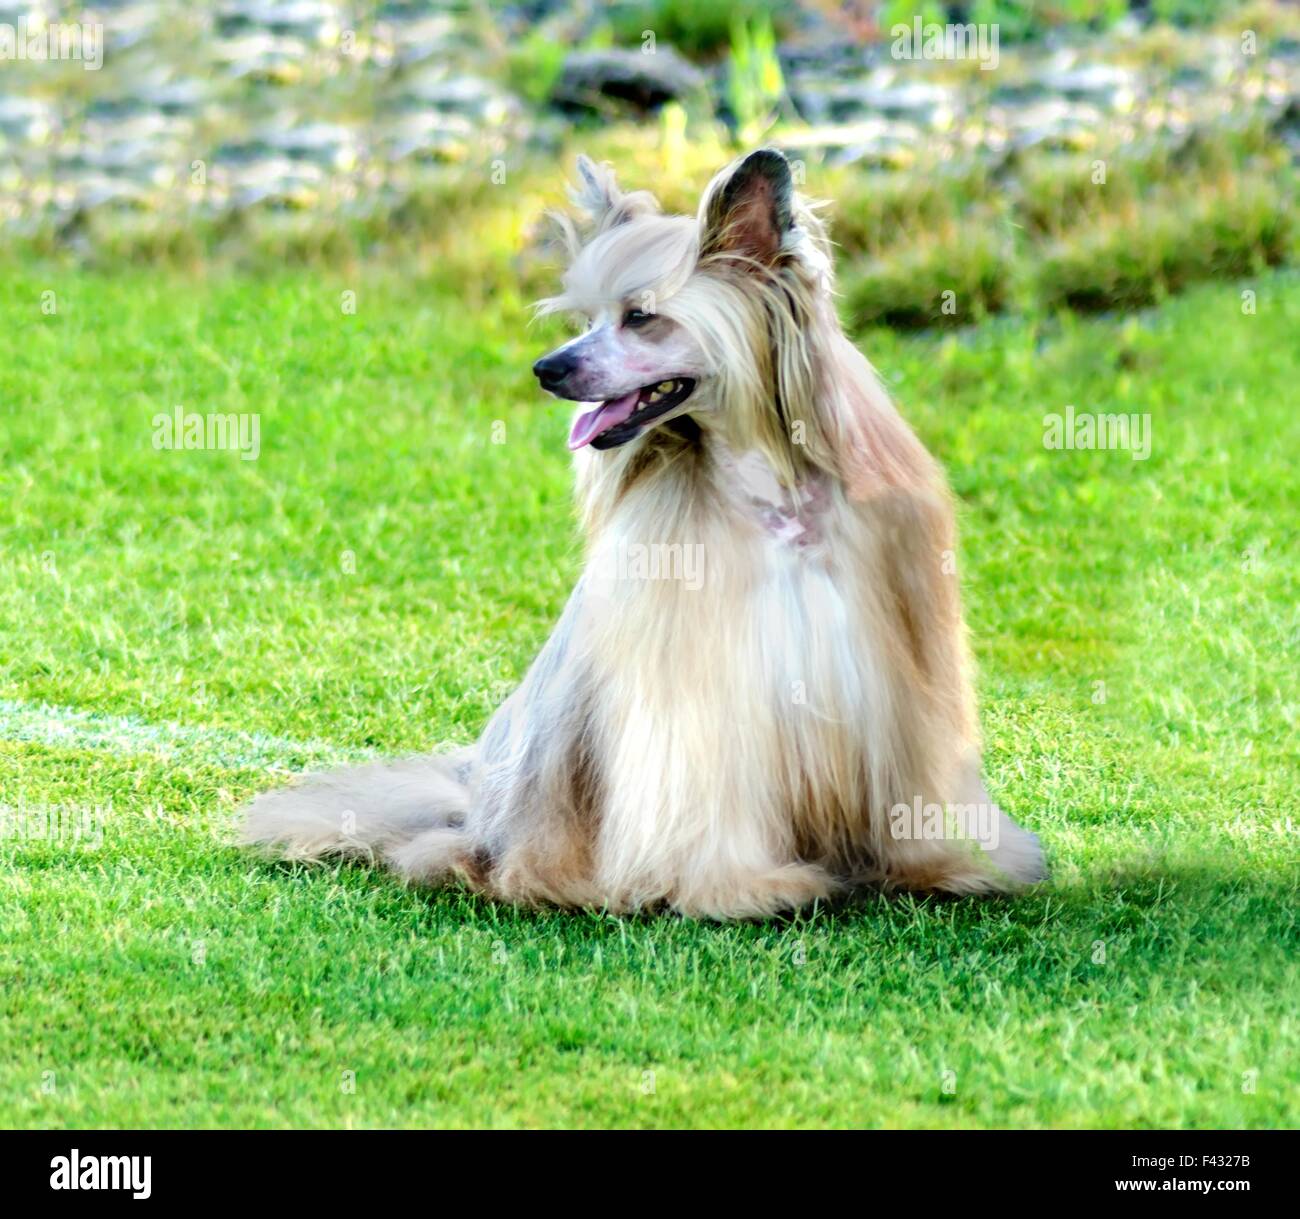 A small Powderpuff Crested dog sitting on the lawn looking very elegant. Powderpuff Chinese Crested dogs are very Stock Photo Alamy